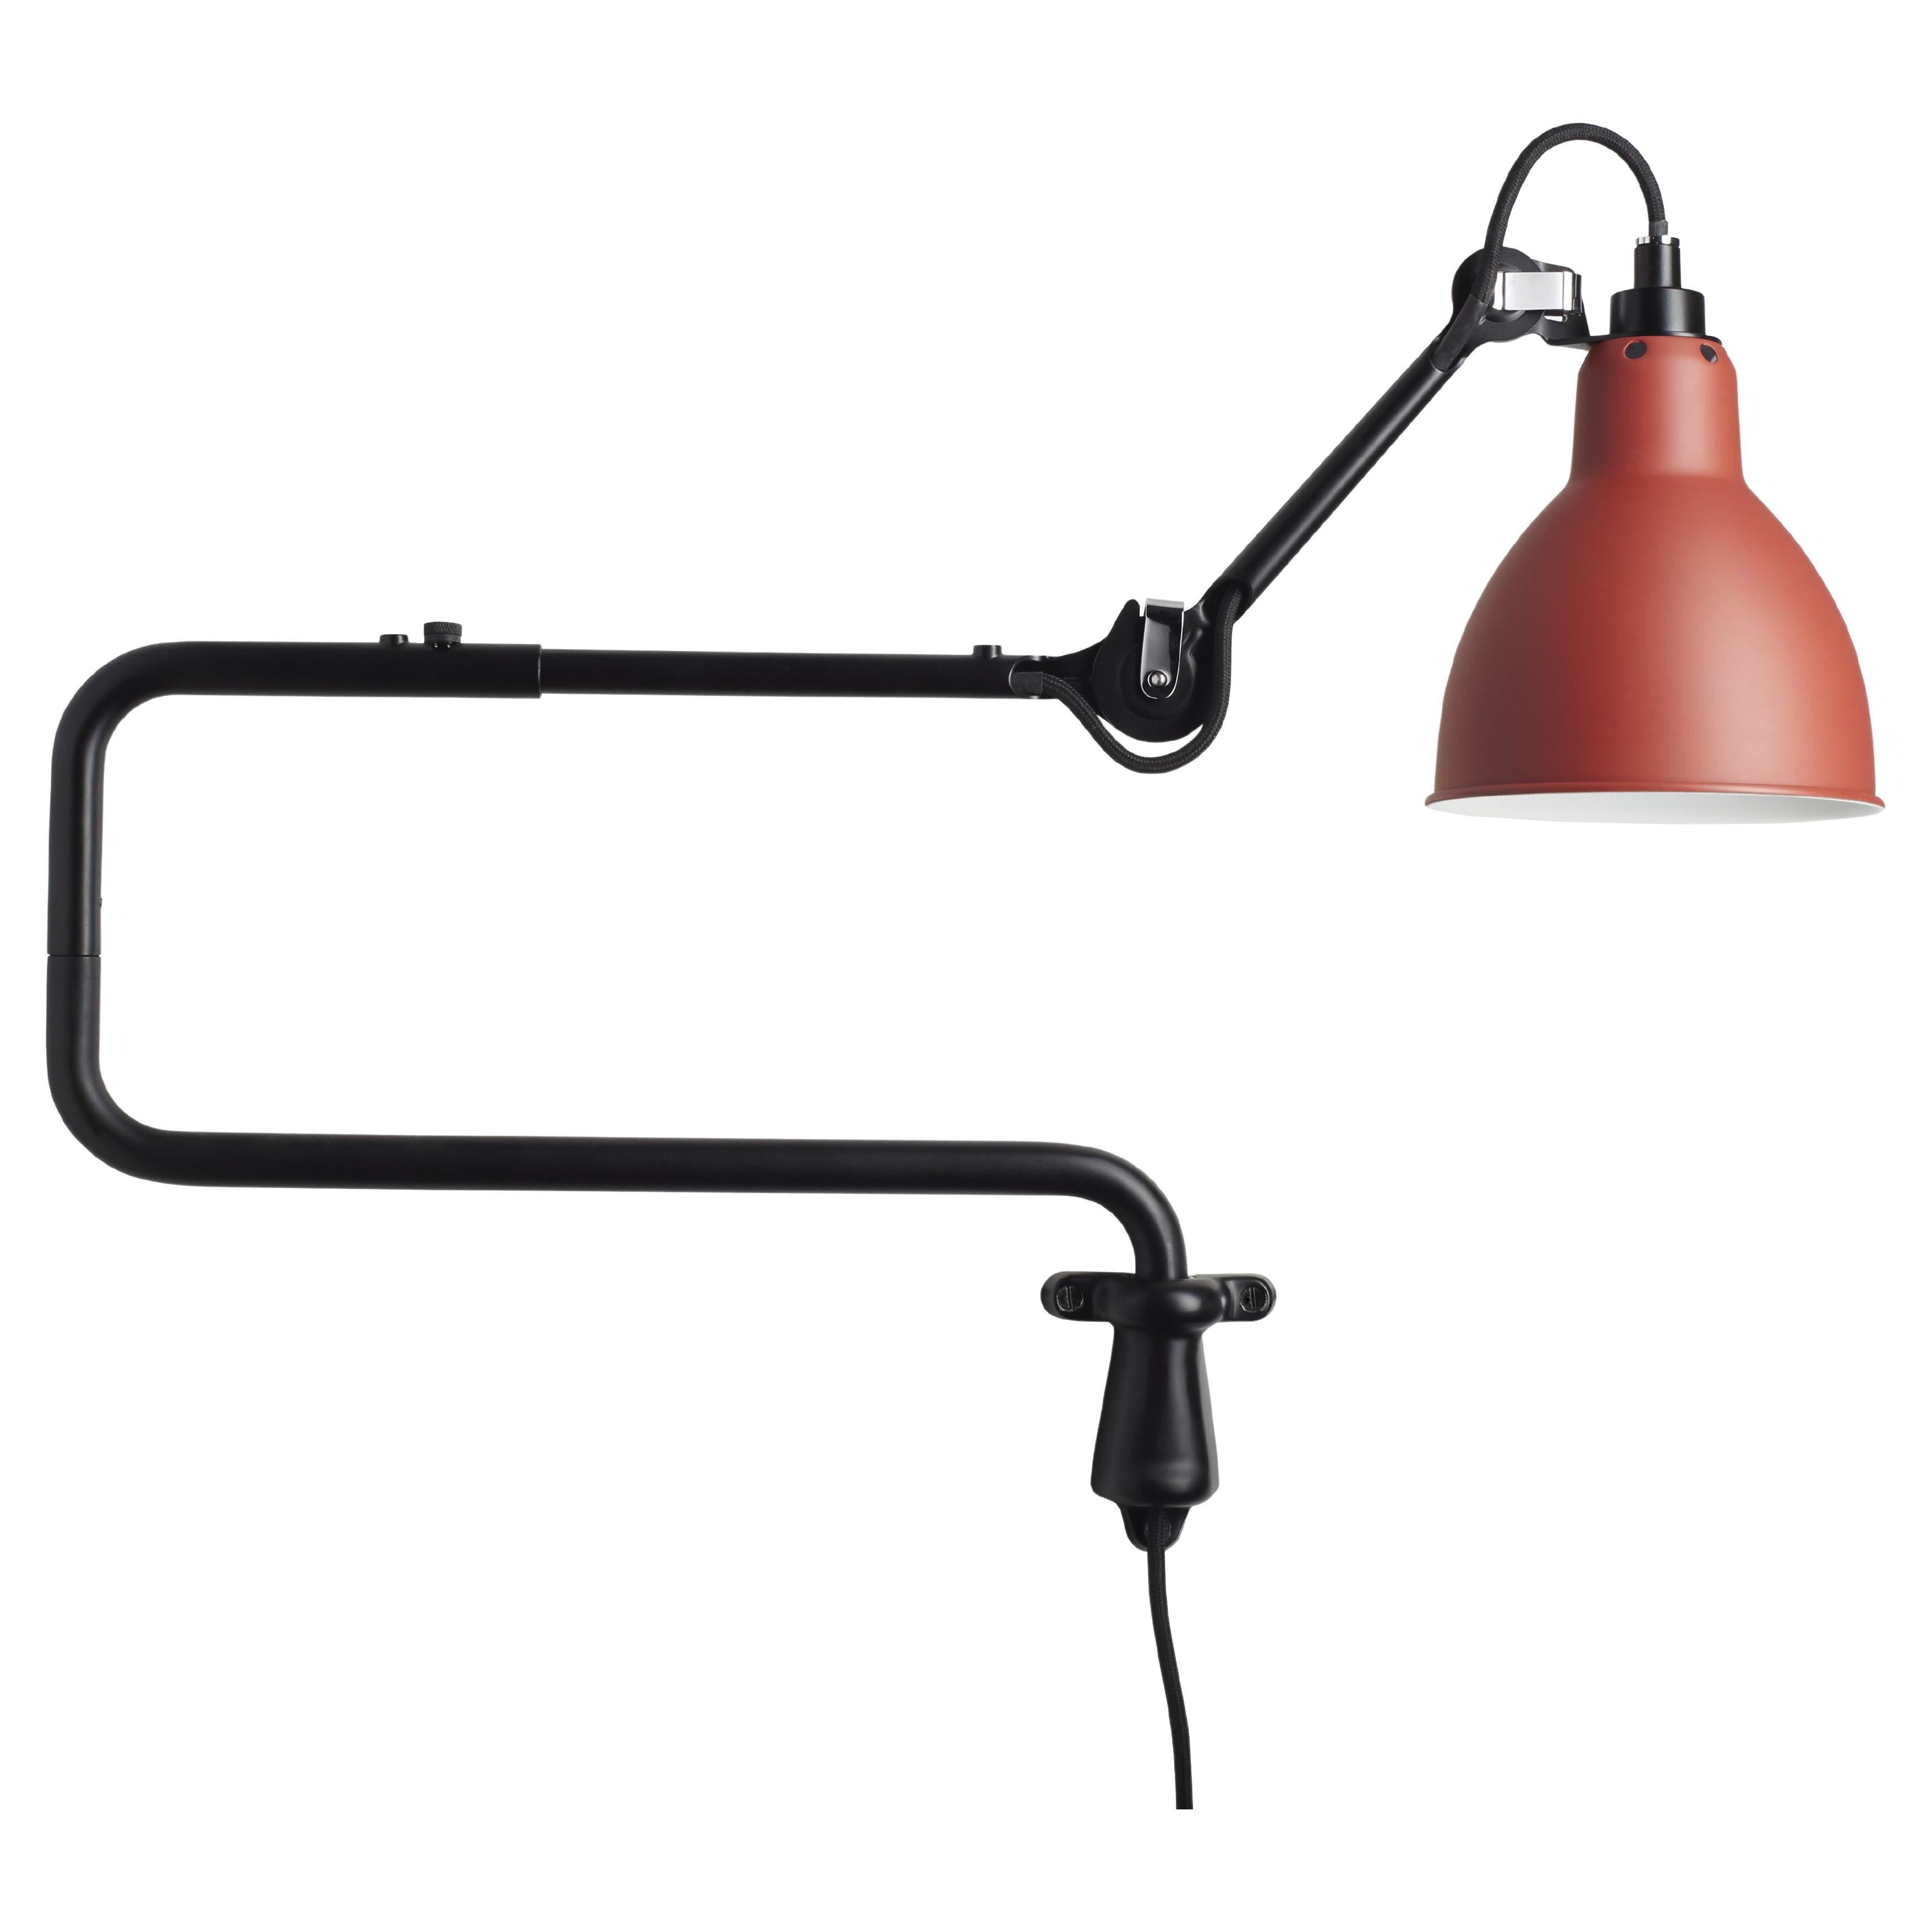 DCW Editions La Lampe Gras N°303 Wall Lamp in Black Arm and Red Shade For Sale